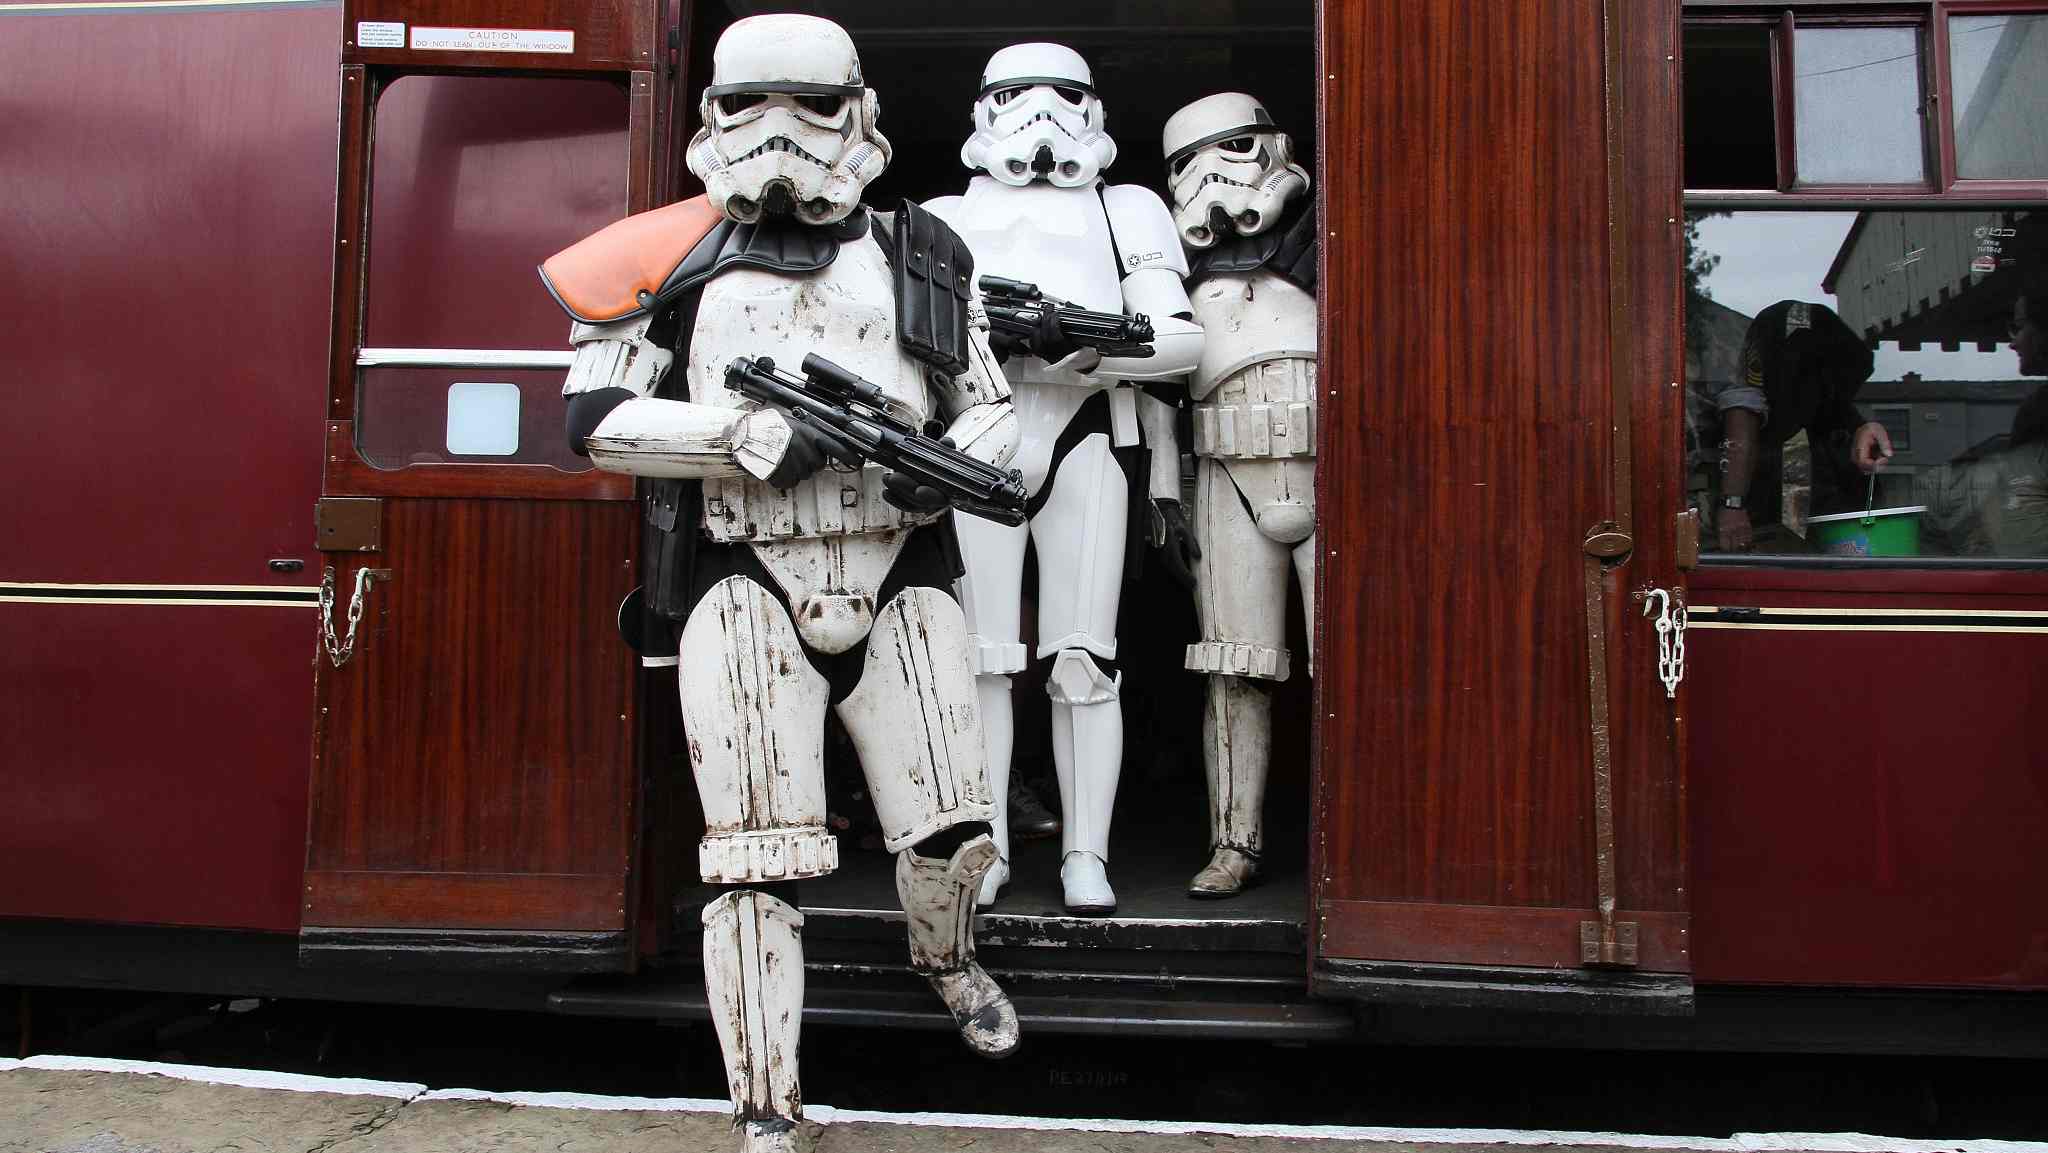 UK railway station brings sci-fi movie characters to life